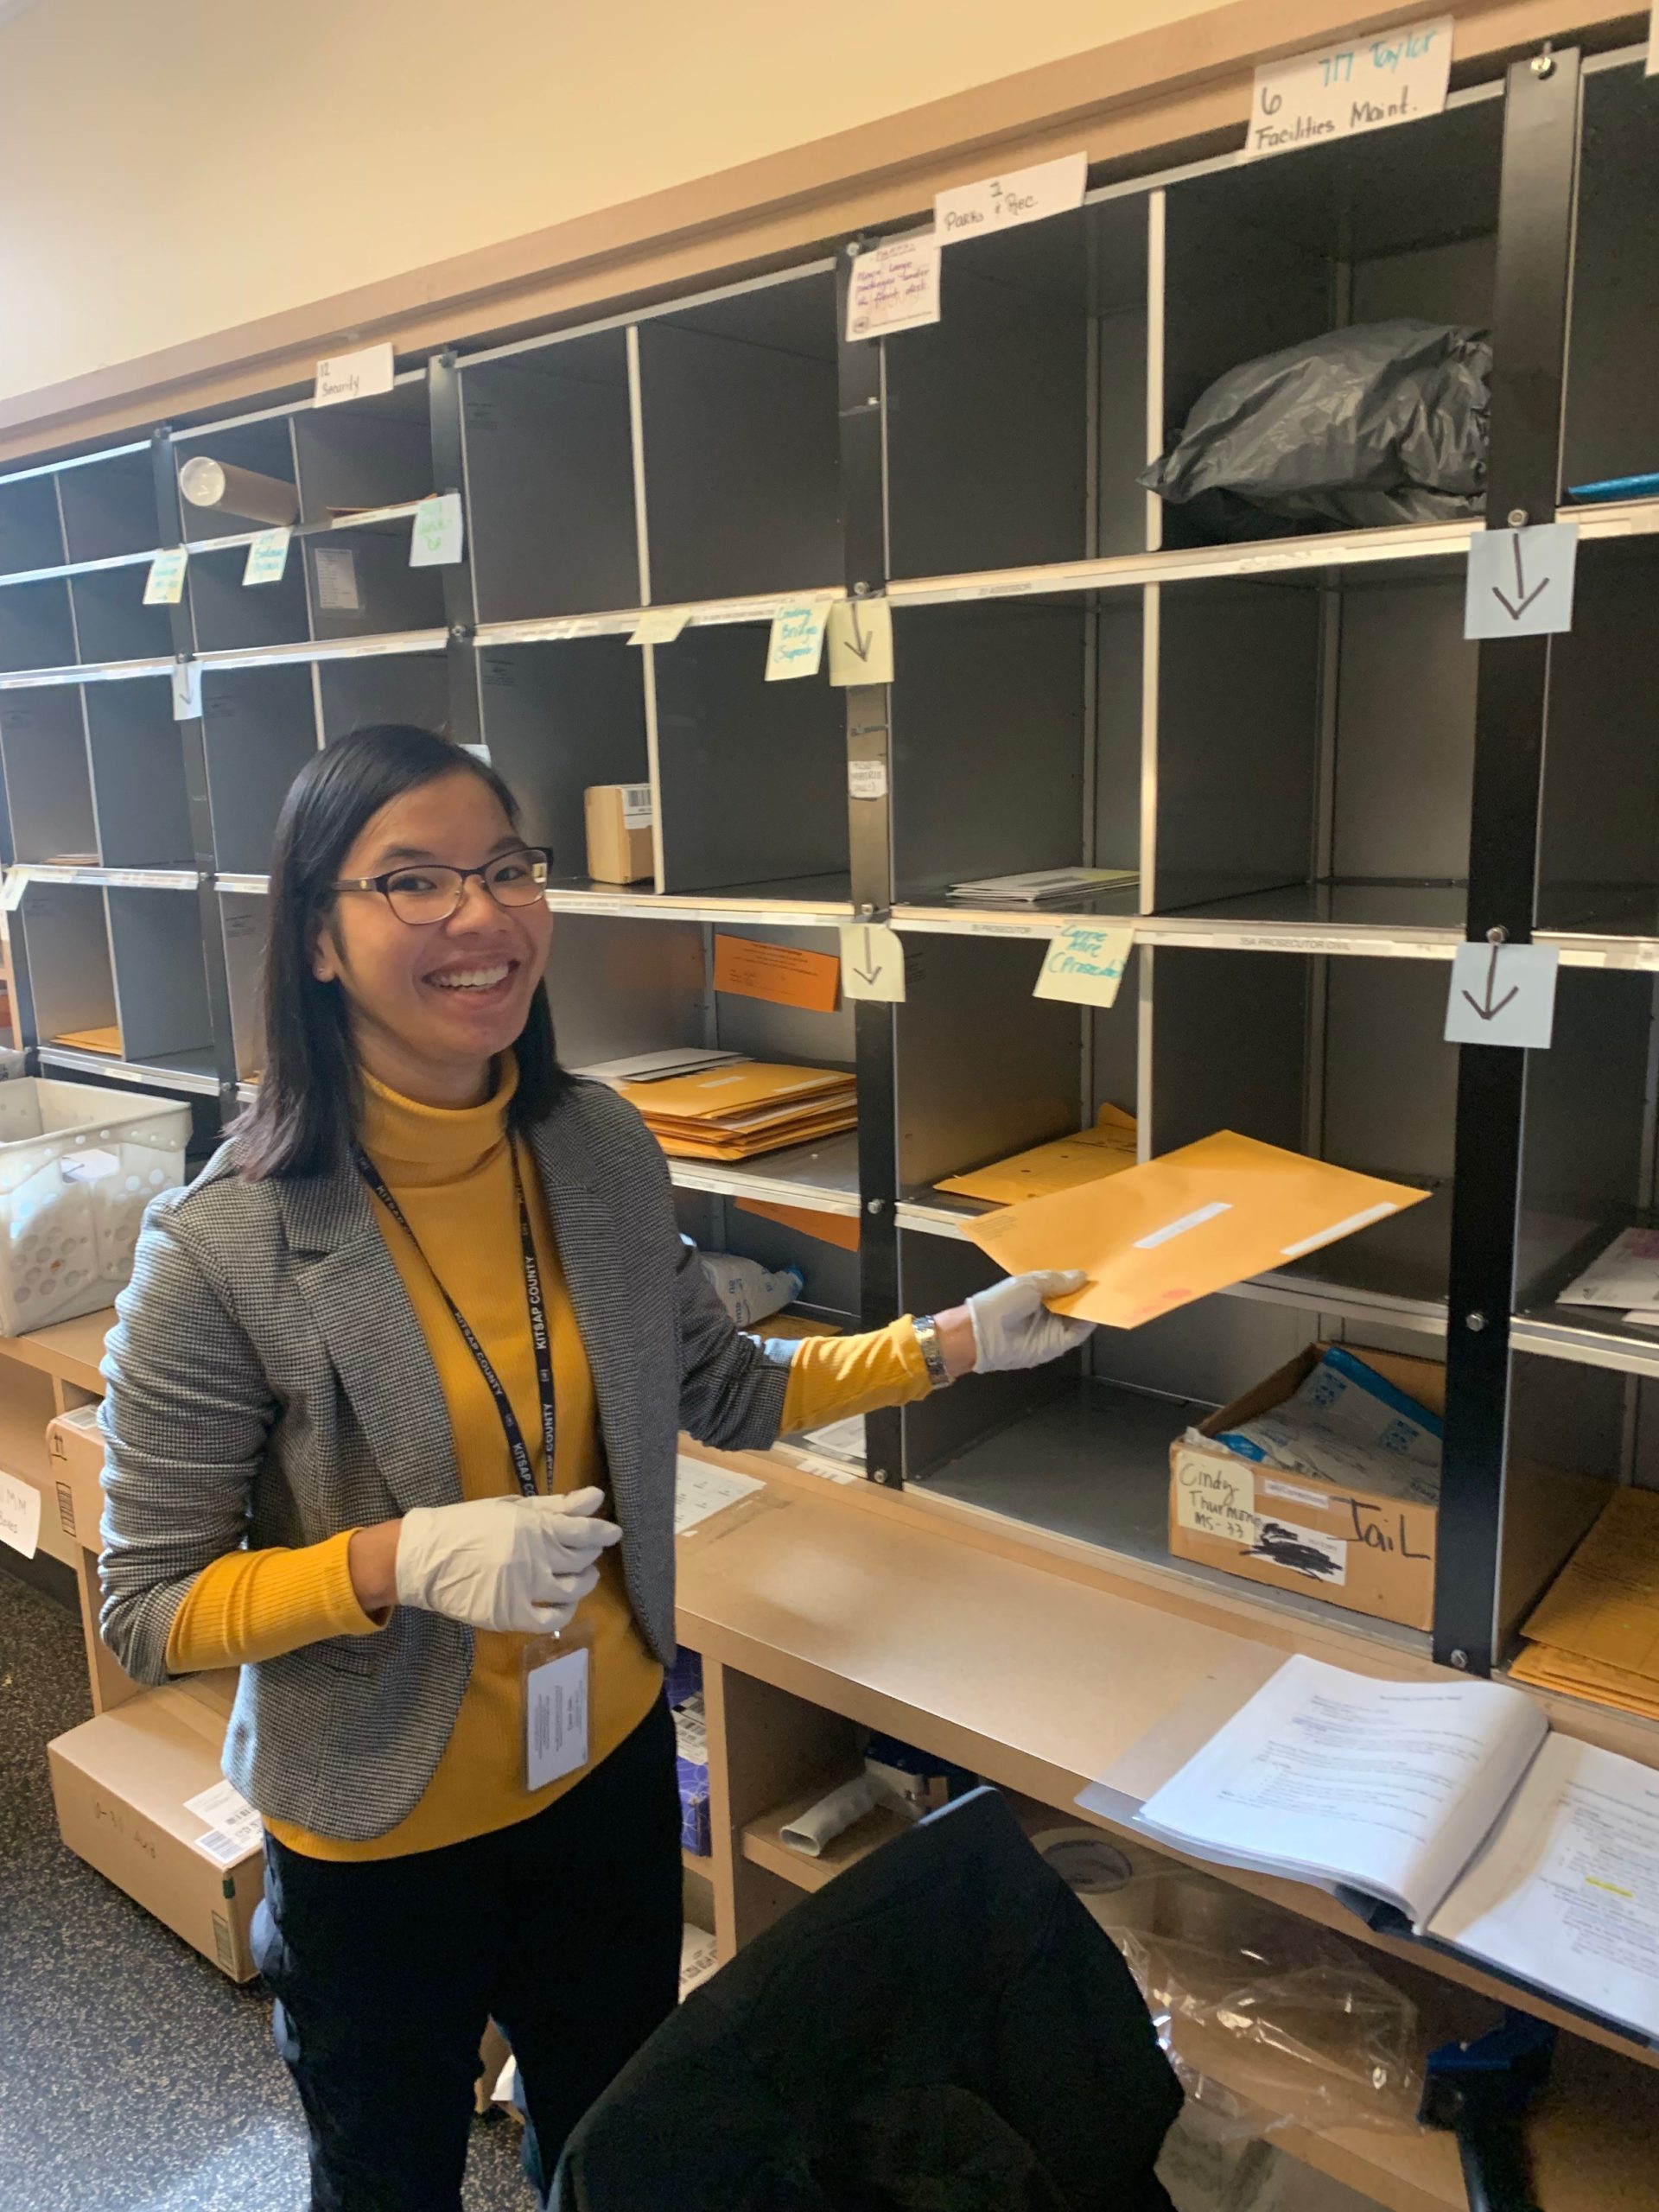 Image: Woman with black hair passed her shoulders, glasses, a yellow shirt, gray blazer, latex gloves, and a badge hanging around her neck on a lanyard, puts mail into a wall organizer.